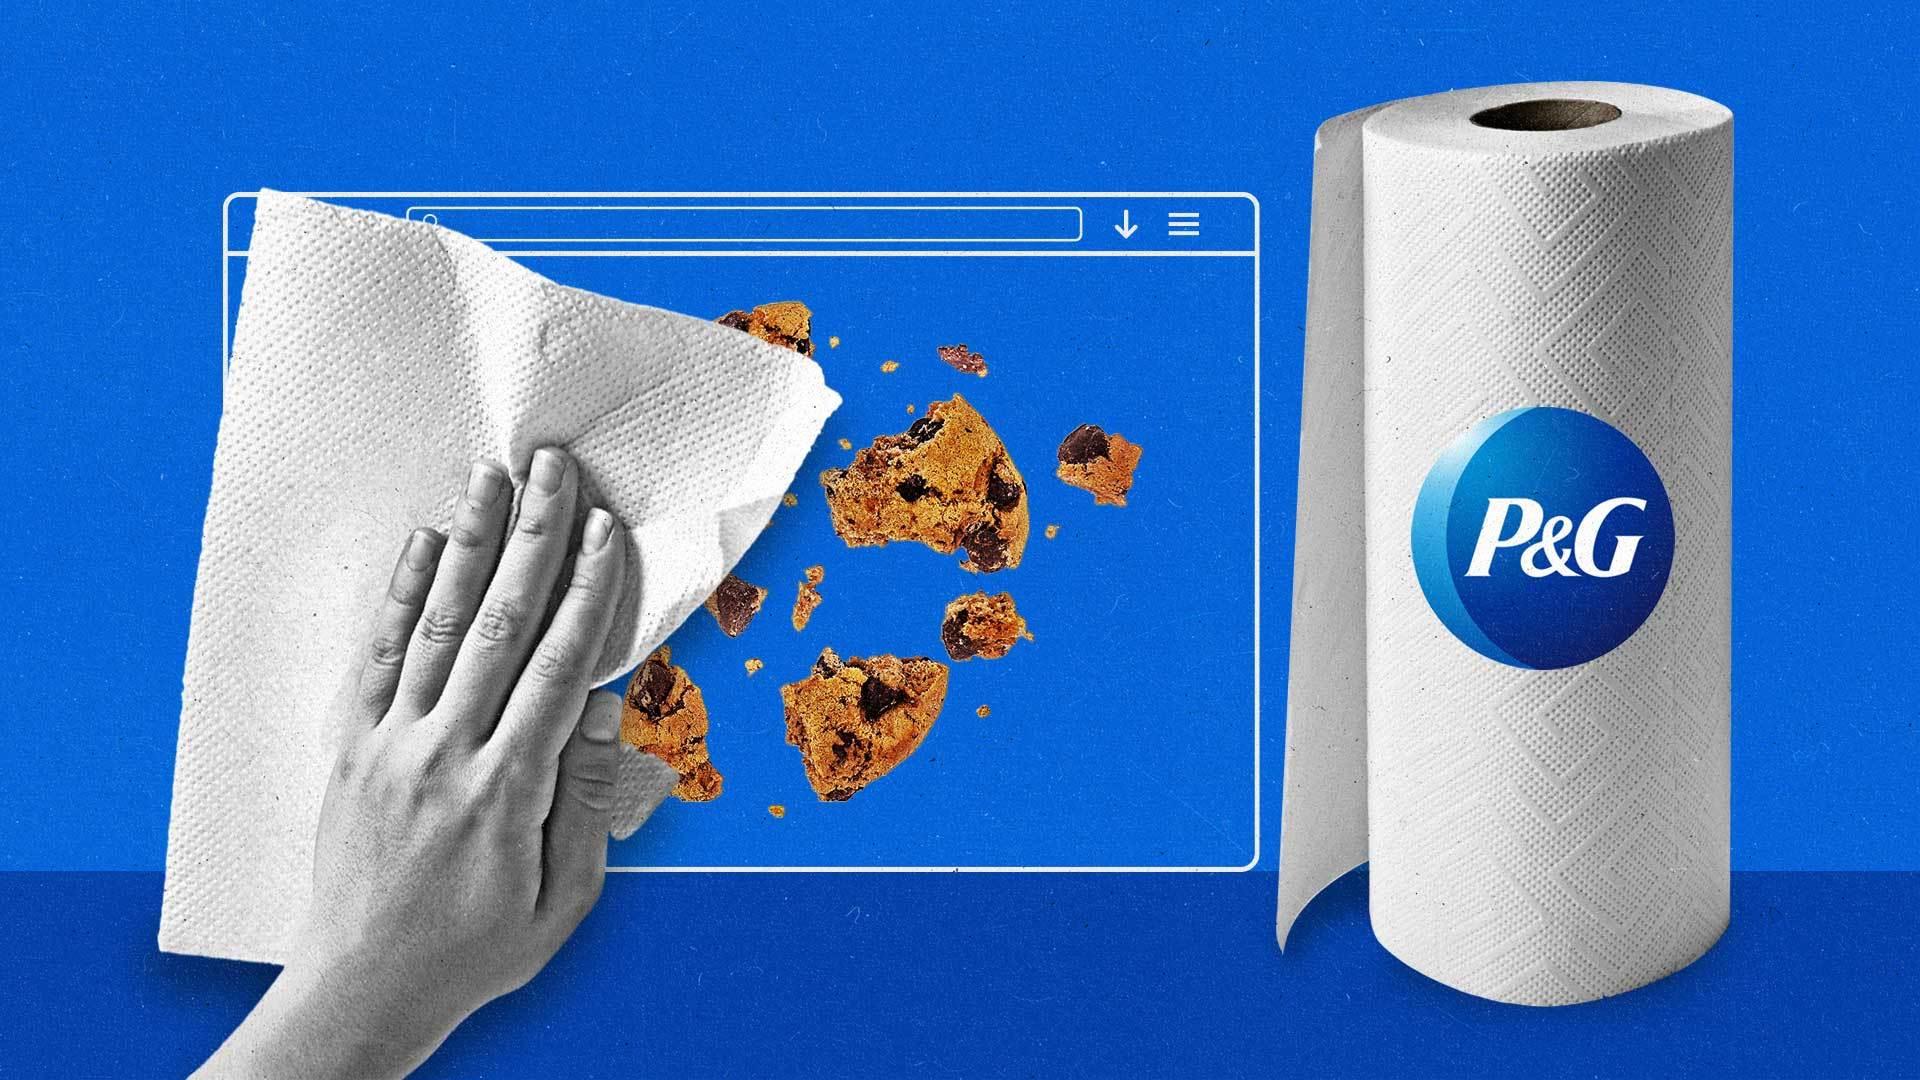 Procter & Gamble, the World's Biggest Advertiser, Switches